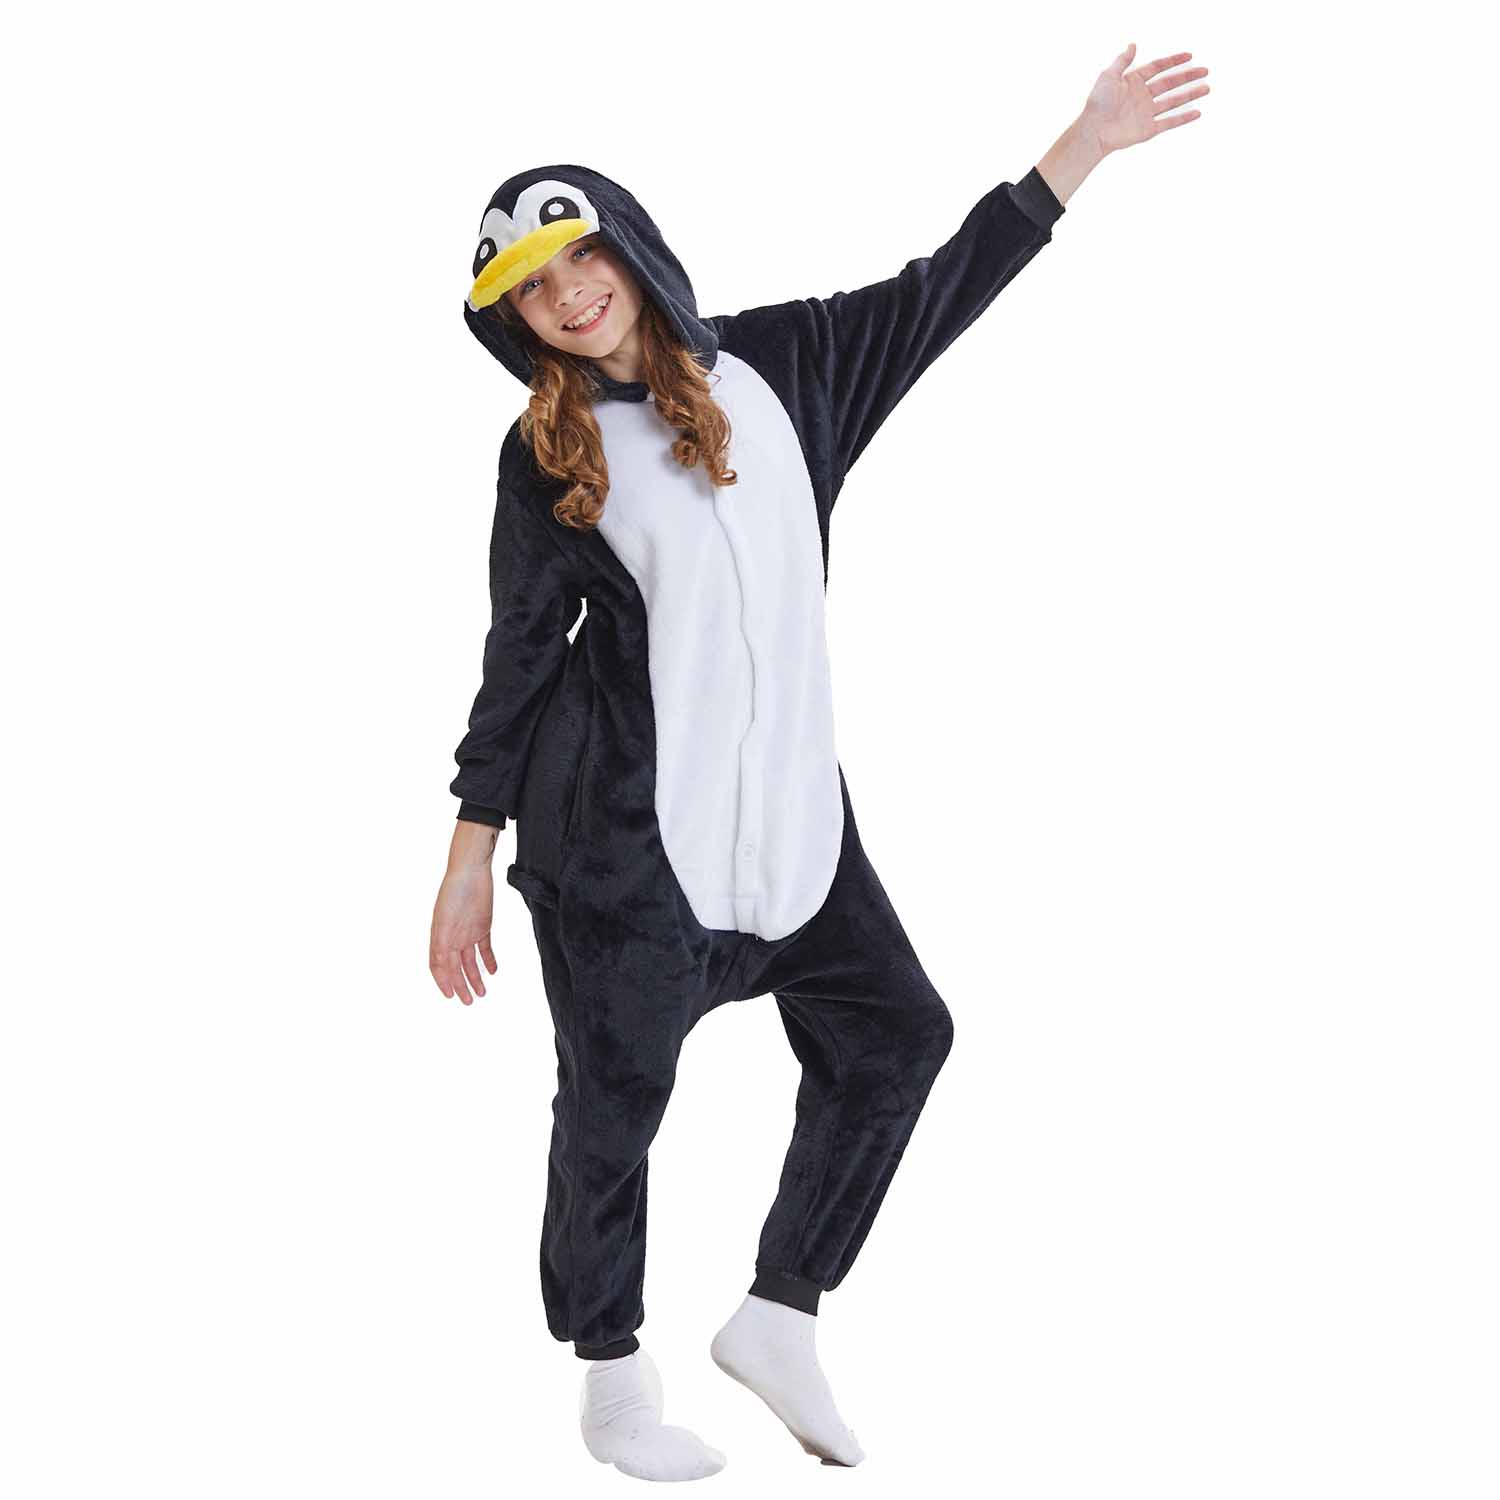 Kids Animal Onesie Organic Children's Clothing Penguin All In One Kids Penguin Outfit Penguin Onesie Children's Animal Onesie Clothing Unisex Kids Clothing Footies & Rompers 